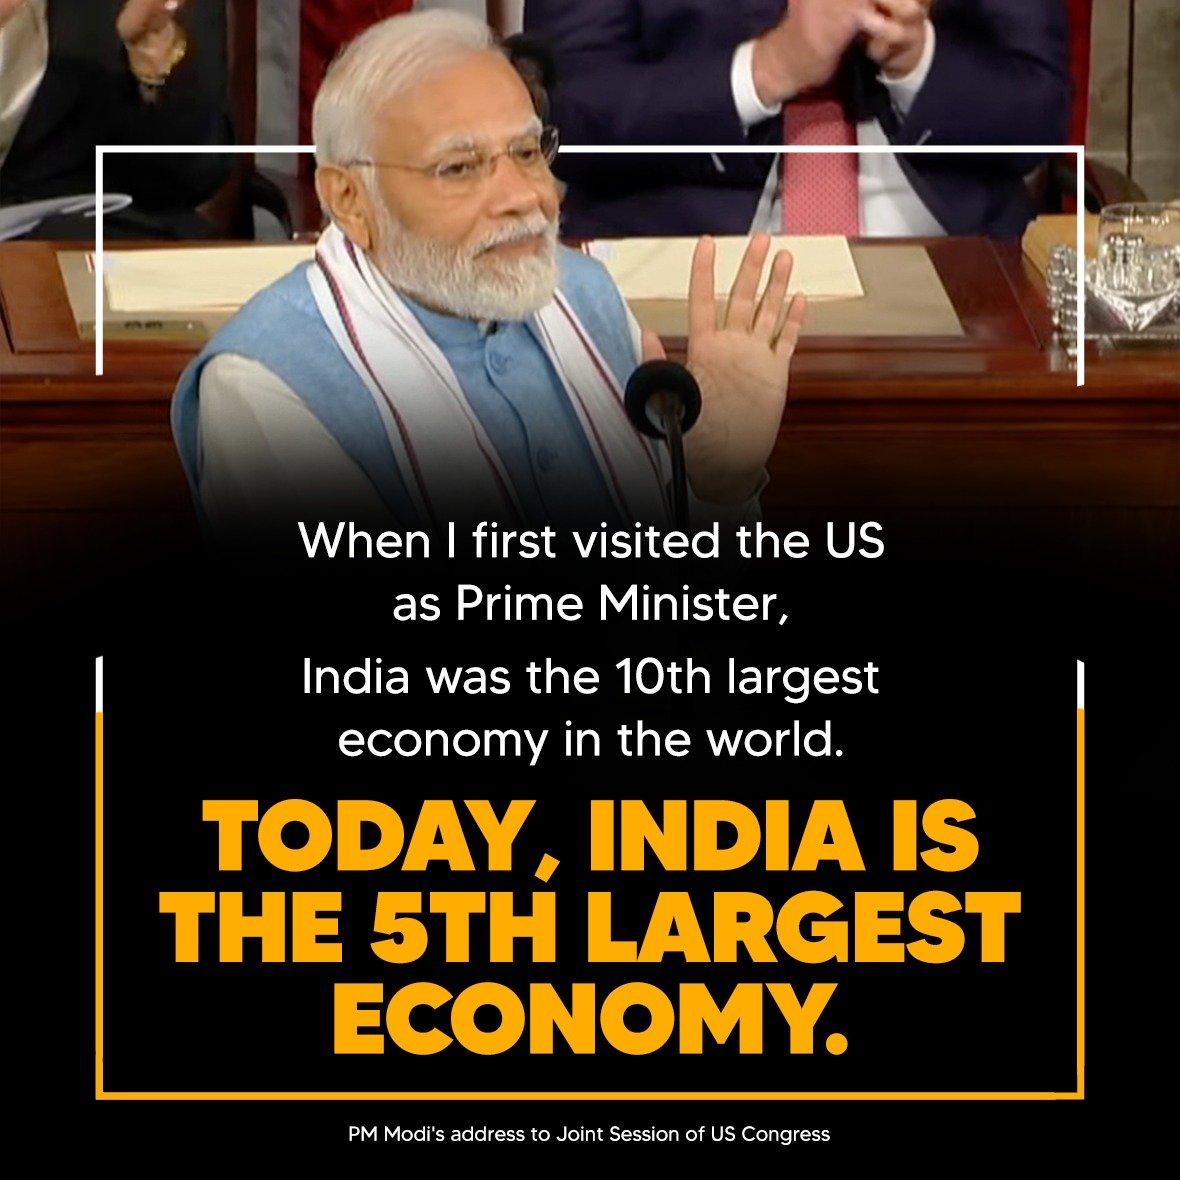 Today, India is the fifth largest economy.